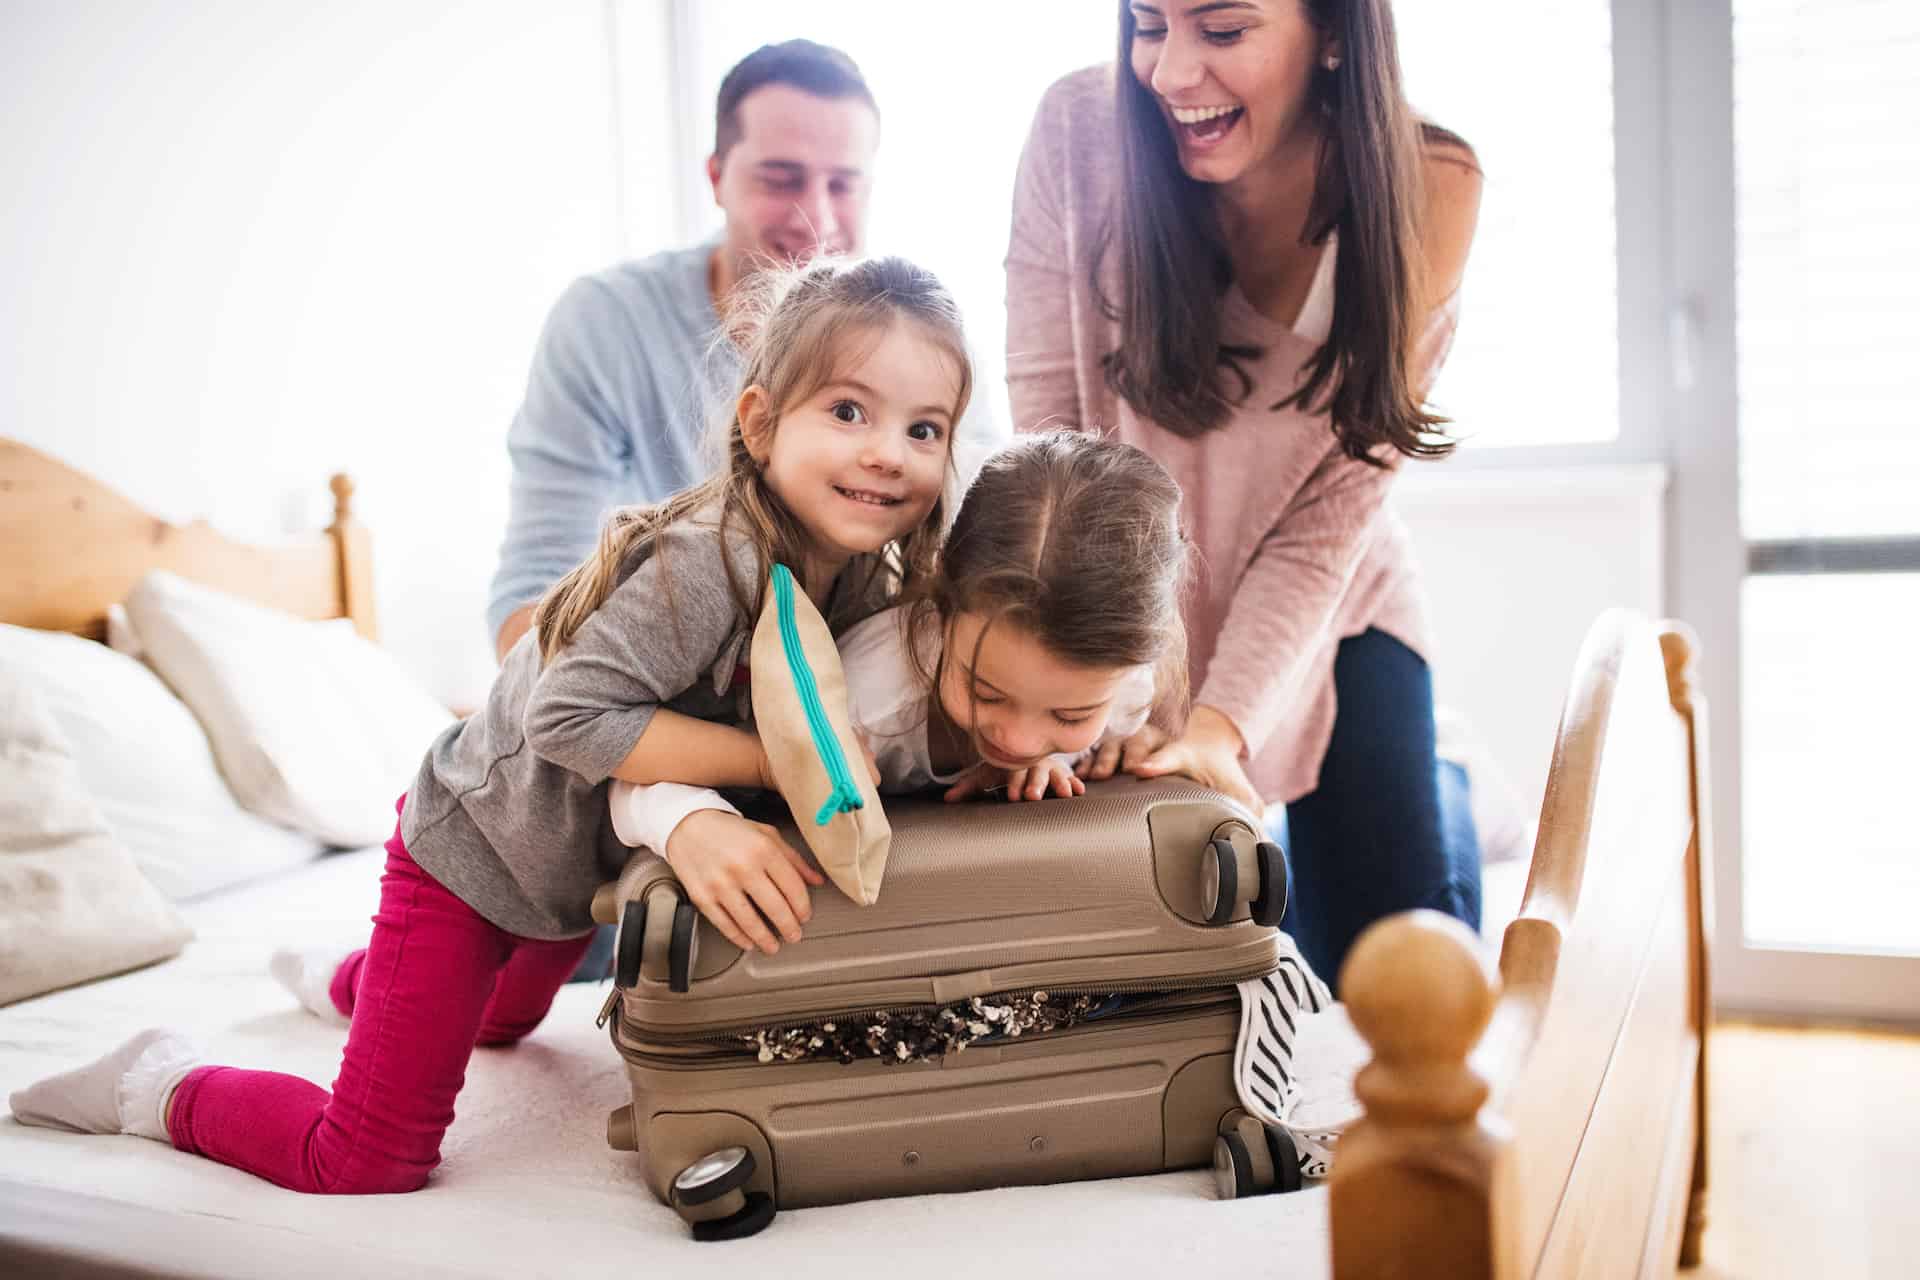 Parents with two kids over a suitcase getting them ready for a trip abroad